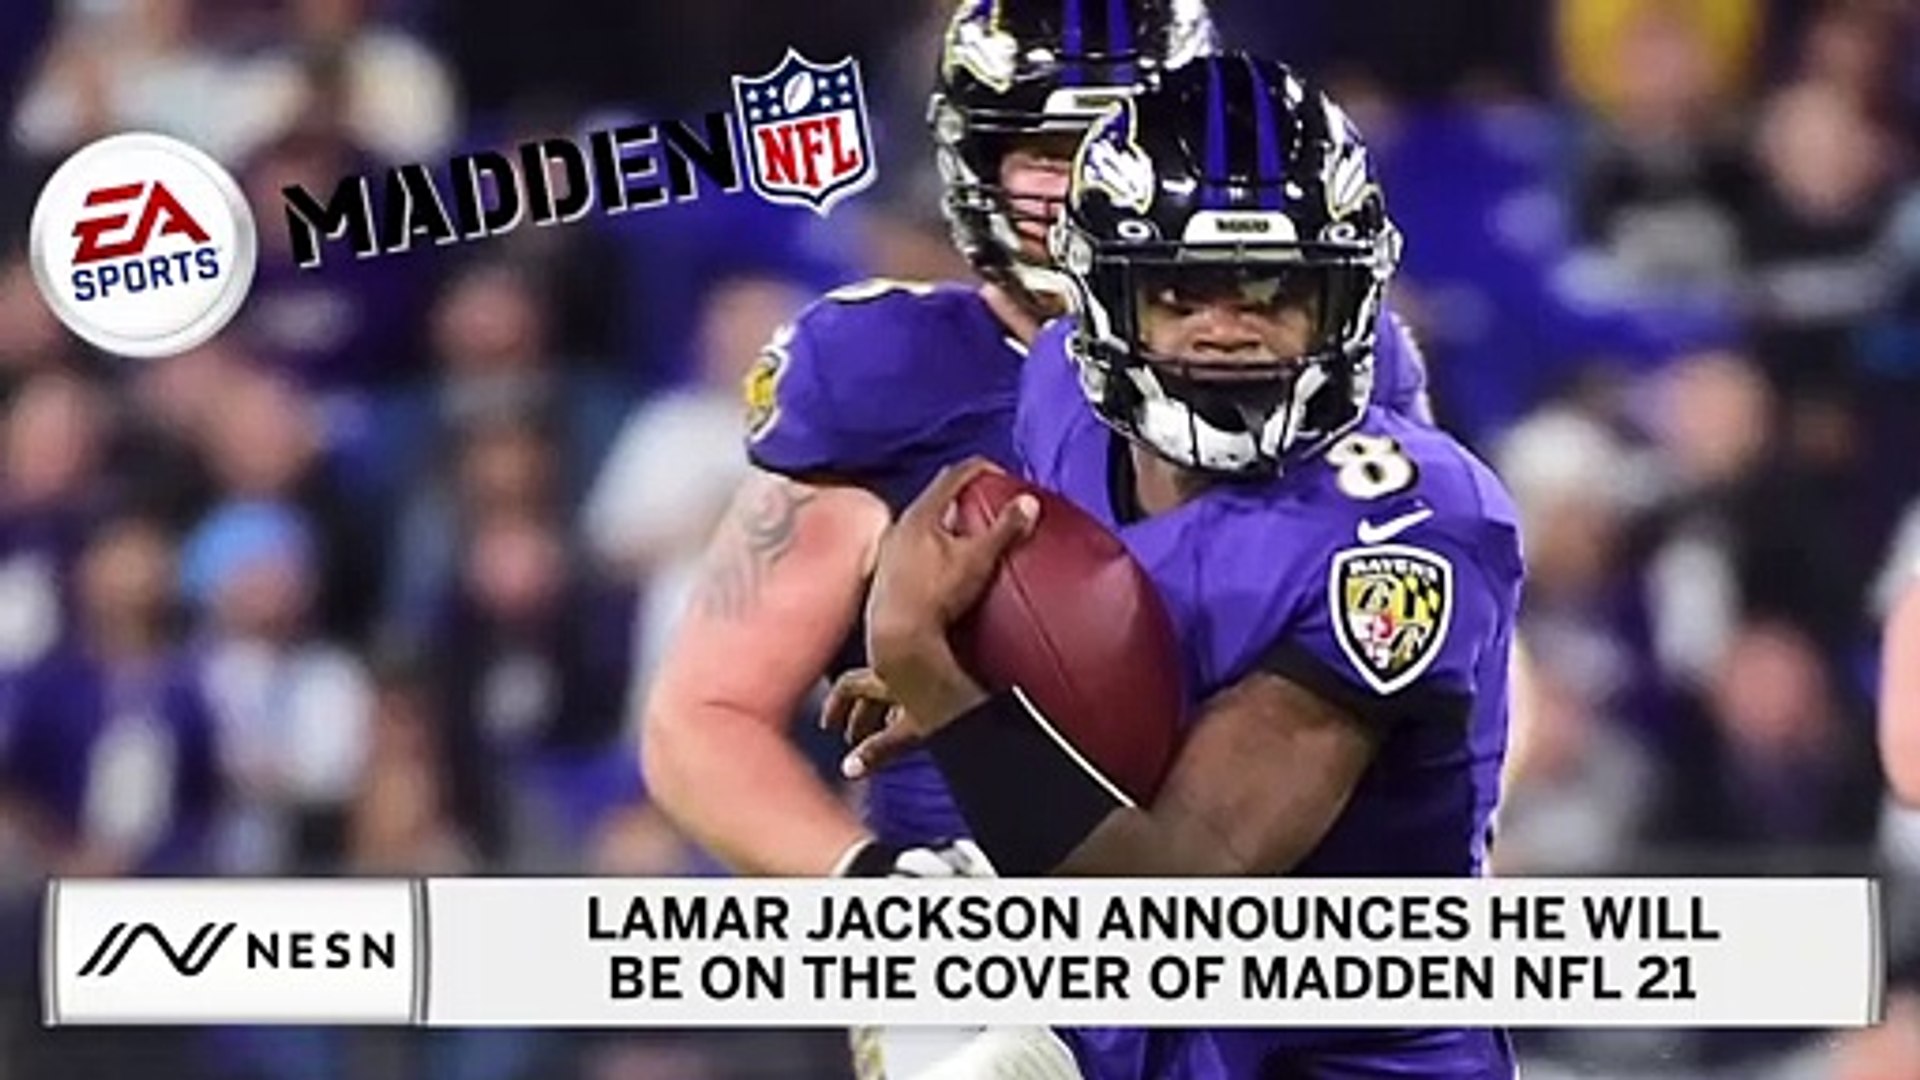 Lamar Jackson Shares He Will Be On Cover Of Madden NFL 21 - video